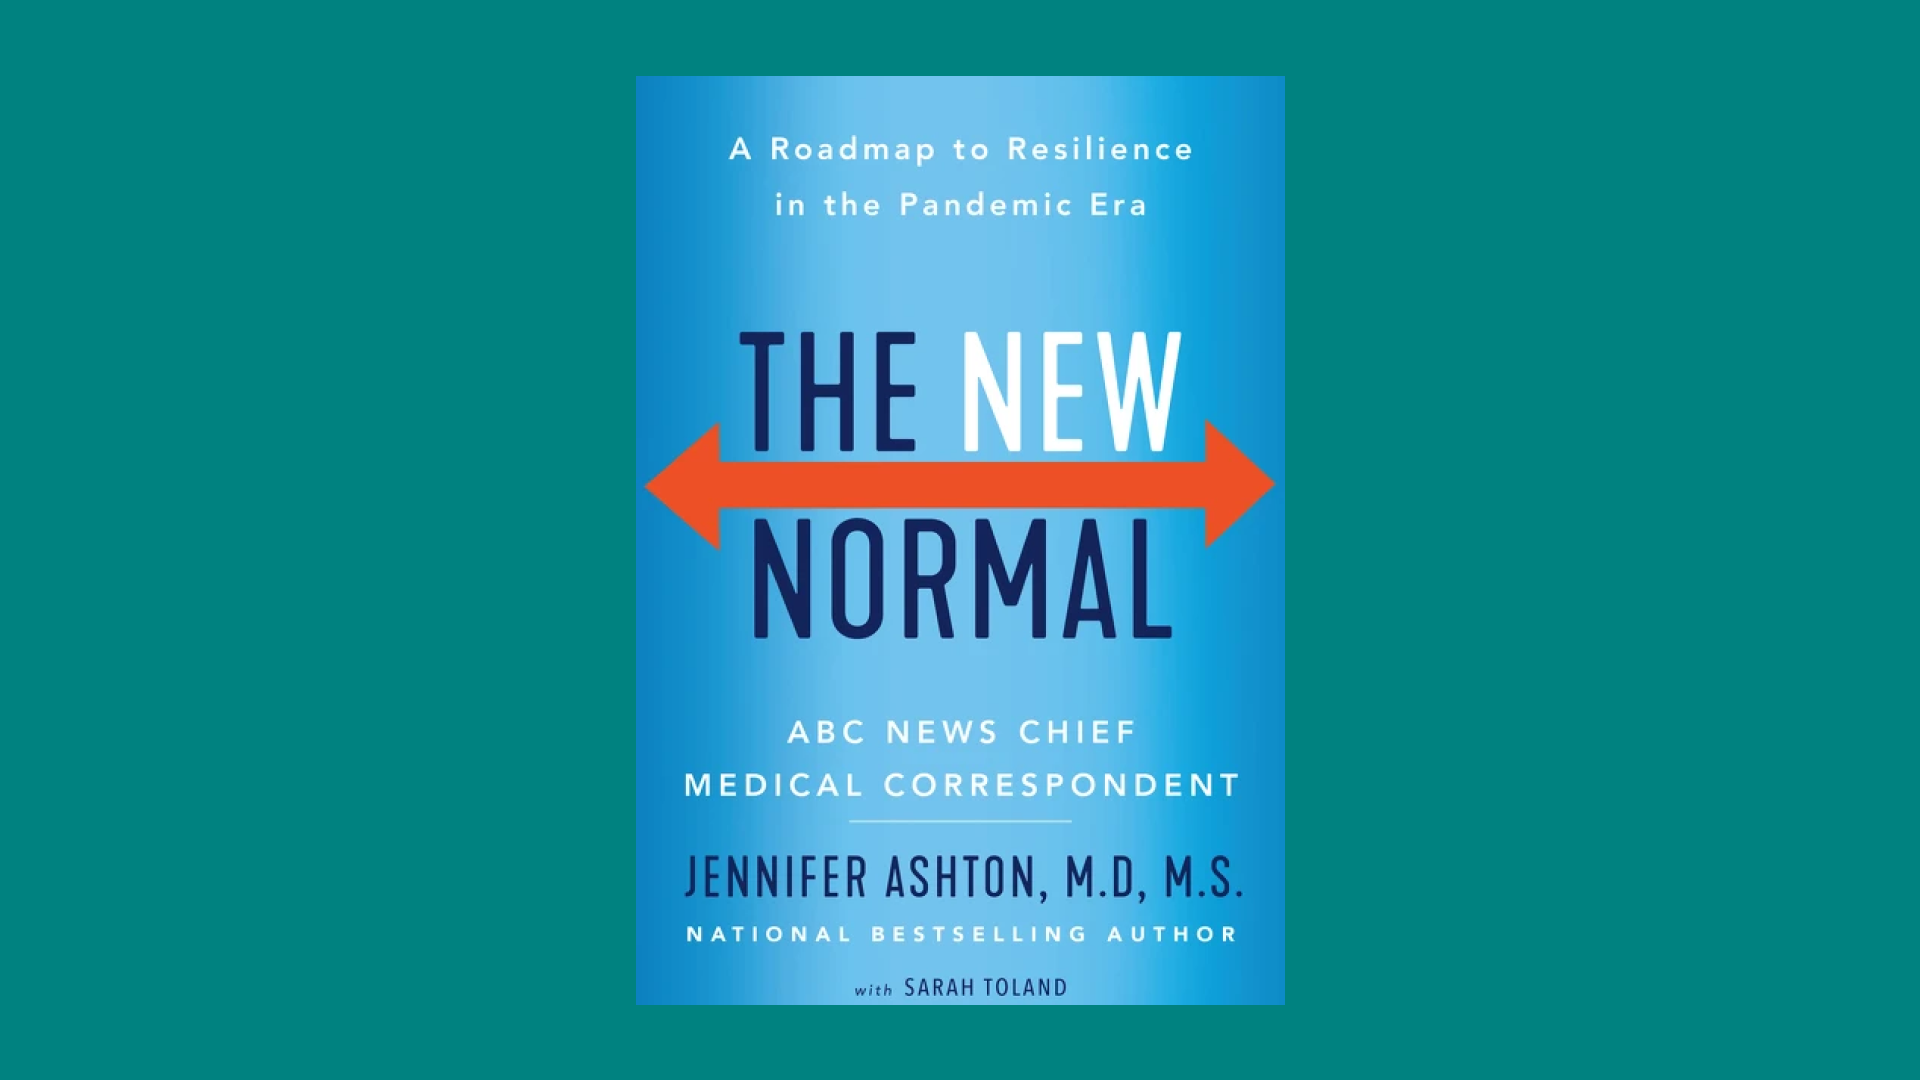  "The New Normal: A Roadmap to Resilience in the Pandemic Era" by Jennifer Ashton, M.D., M.S. 